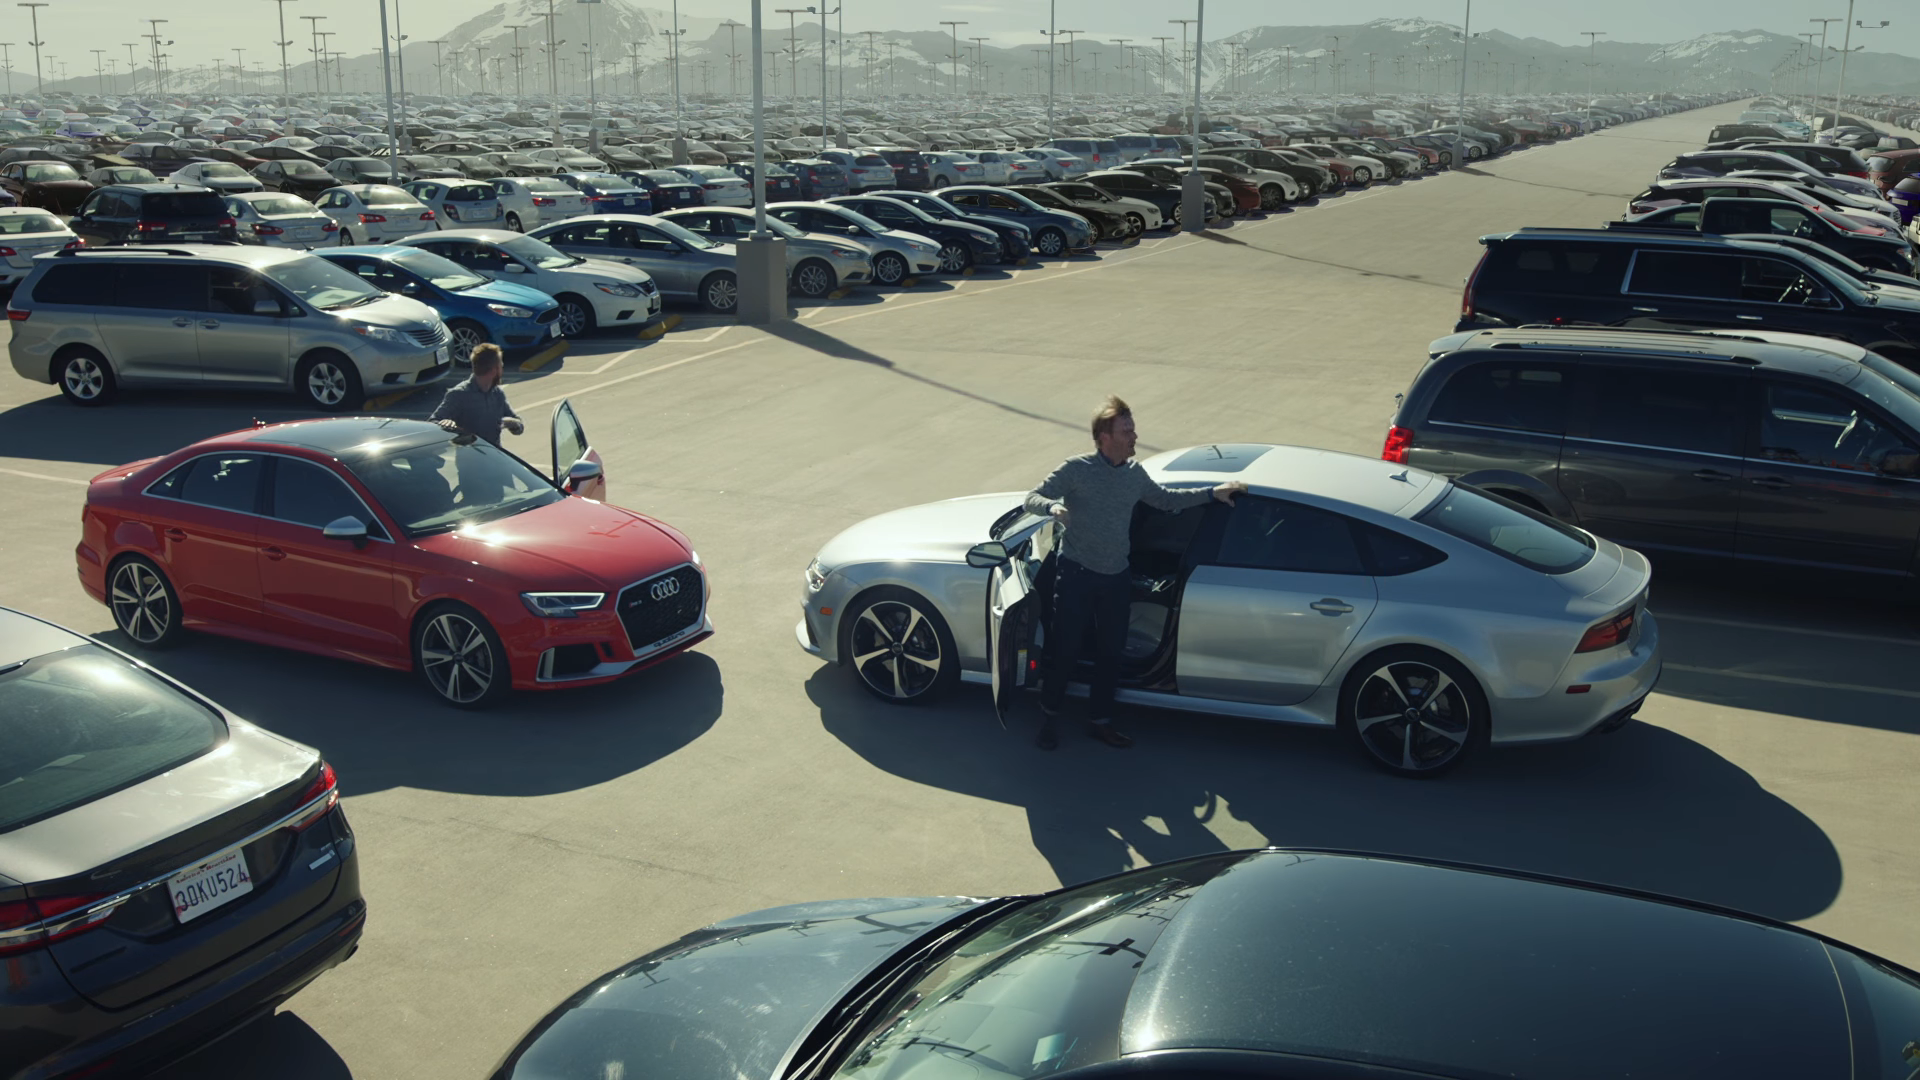 Audi’s Holiday Campaign Pairs Performance with Parking Lot Pitfalls